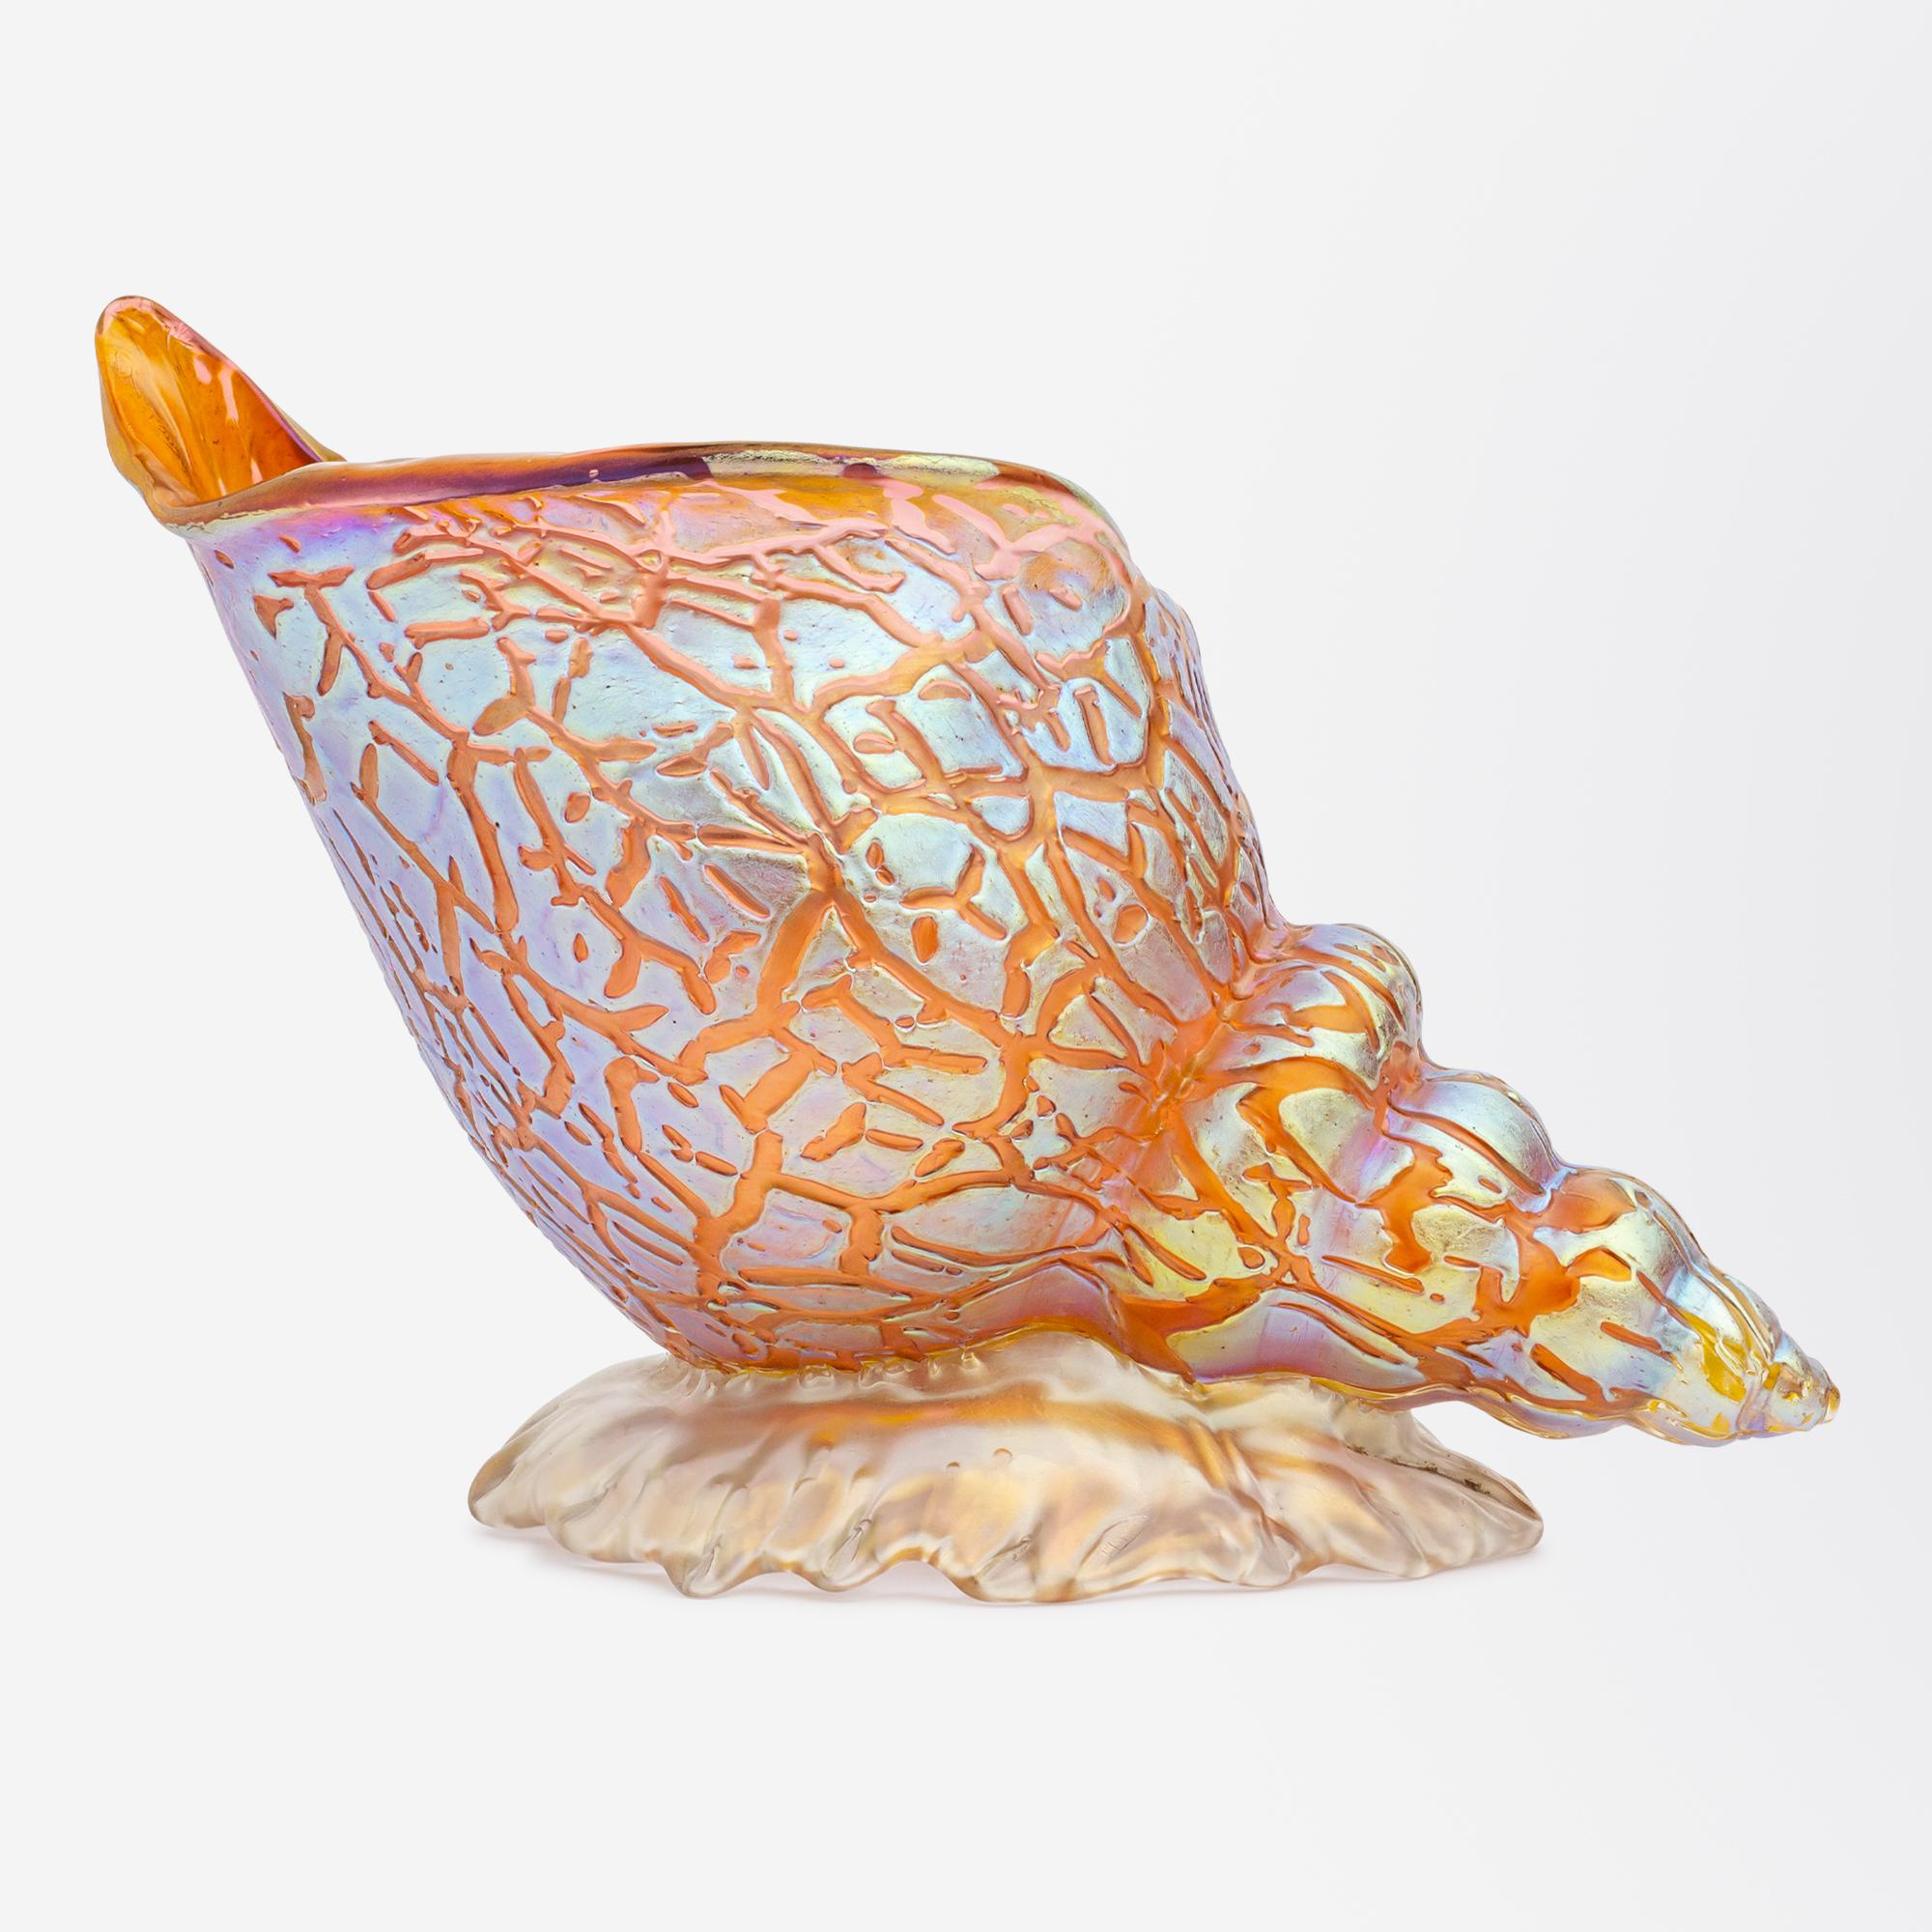 An Austrian glass conch shell by Bohemian glass maker, Loetz in the pink ground with mimosa decor, circa 1890. The shell and snail form vases were among the most popular of Loetz's designs and are showcases of the highest quality craftsmanship they